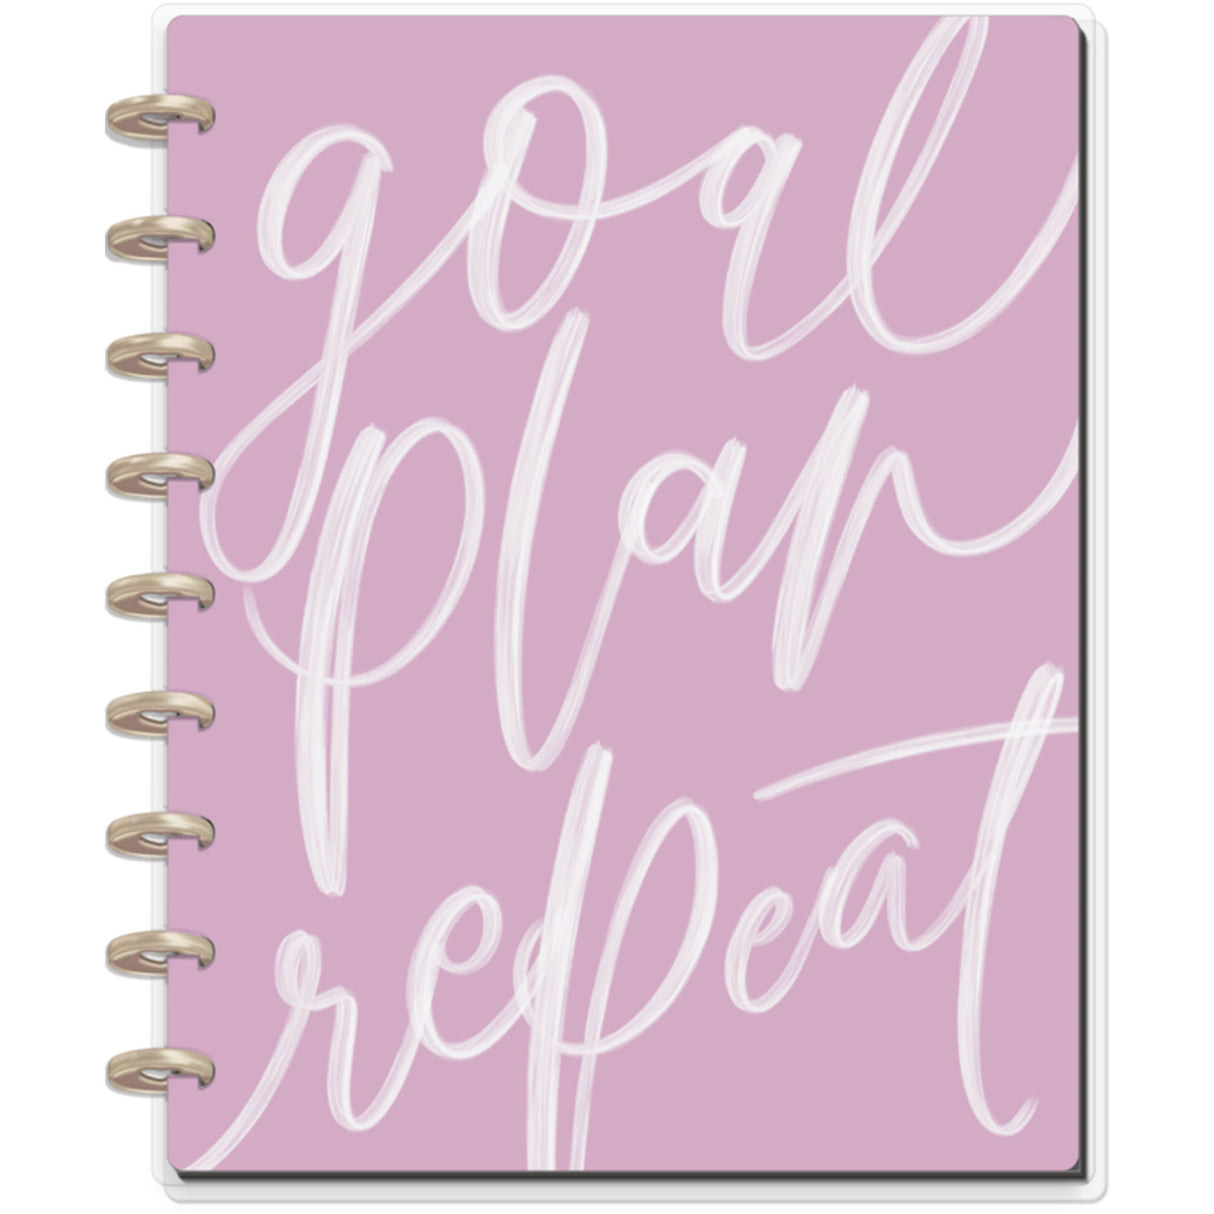 Happy Planner Classic Goals Guided Journal cover